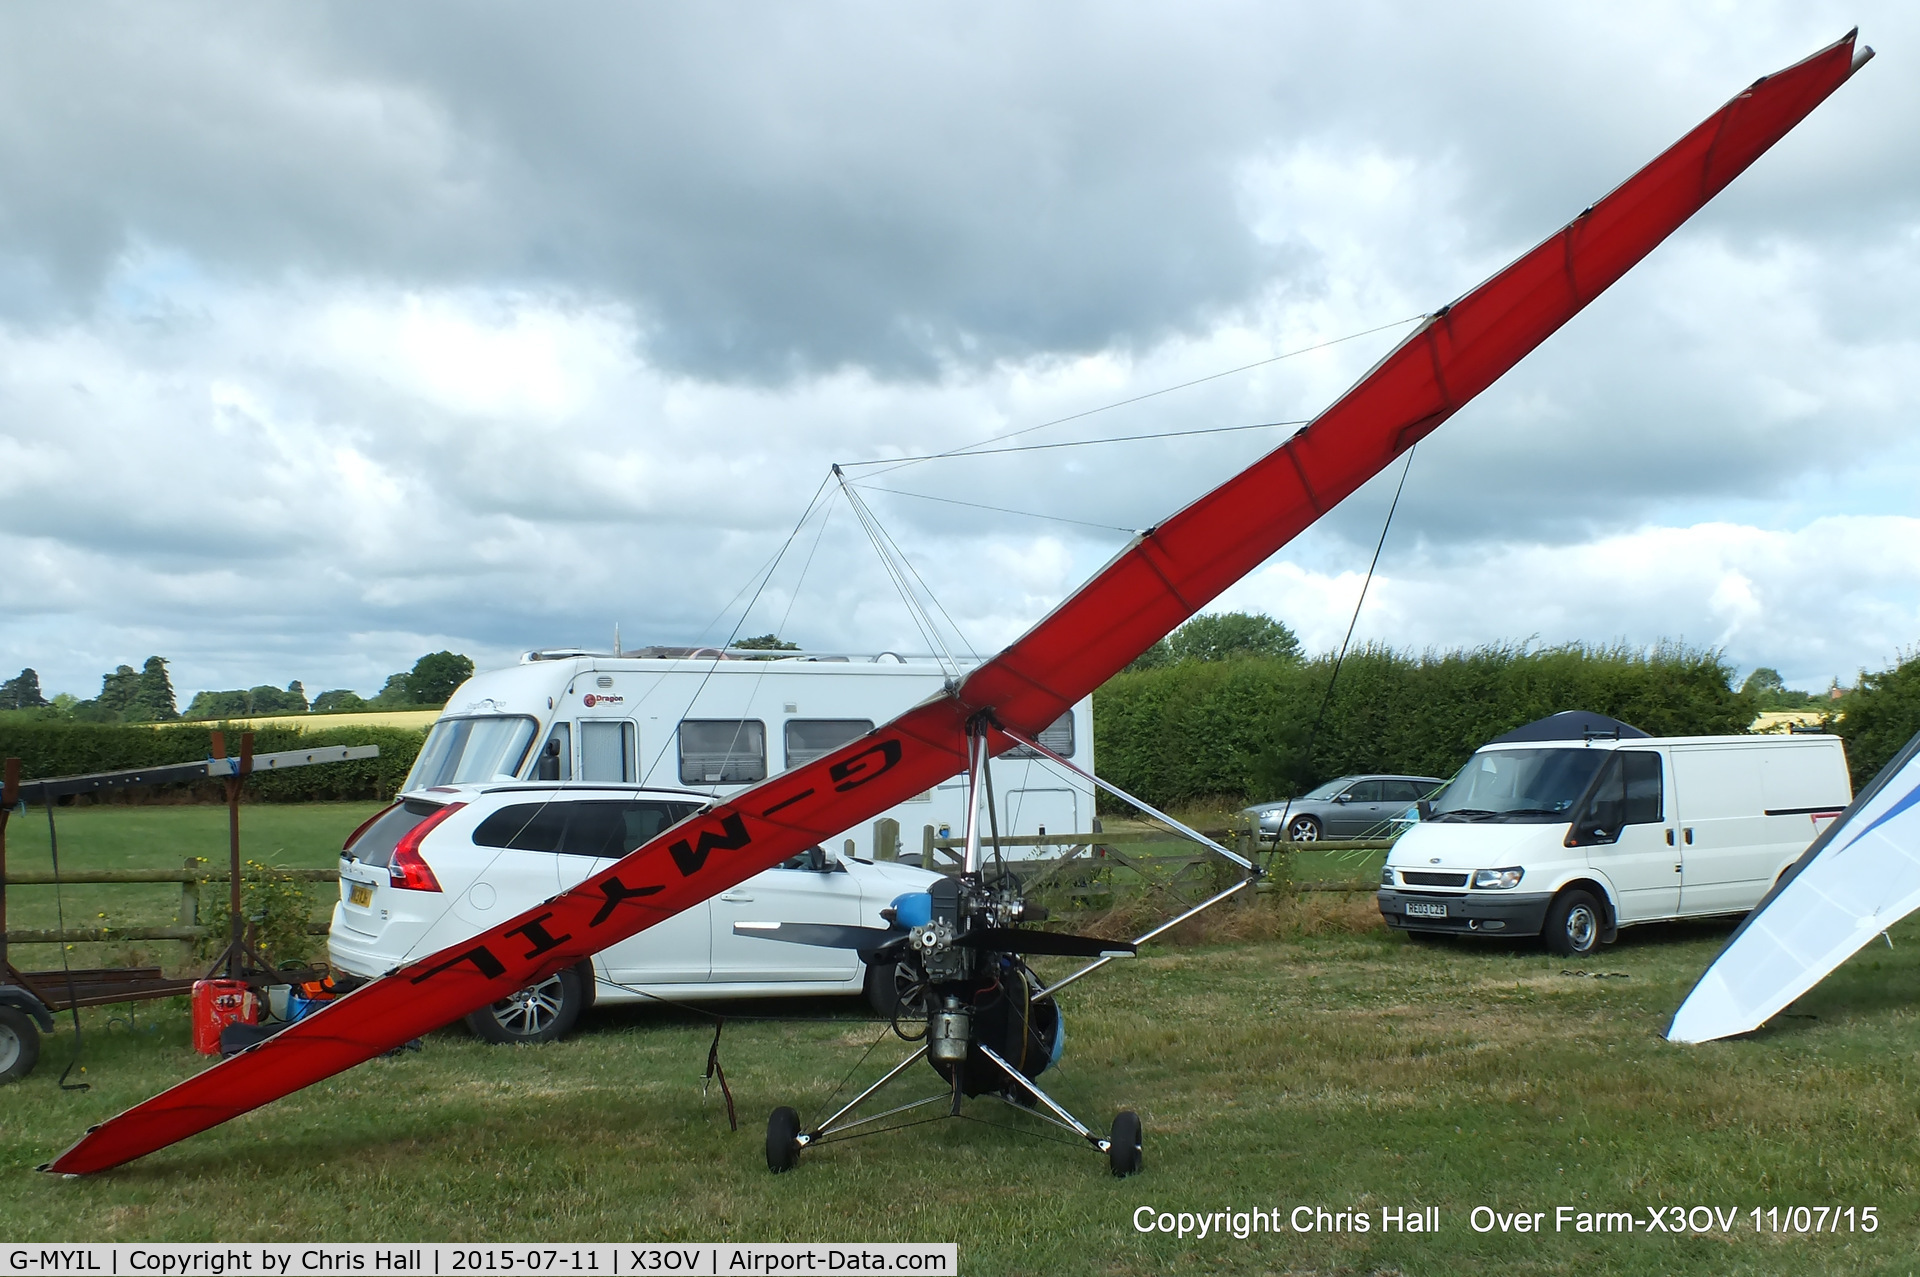 G-MYIL, 1993 Cyclone Airsports Chaser S 508 C/N CH849, at ‘Over Farm’, Gloucester